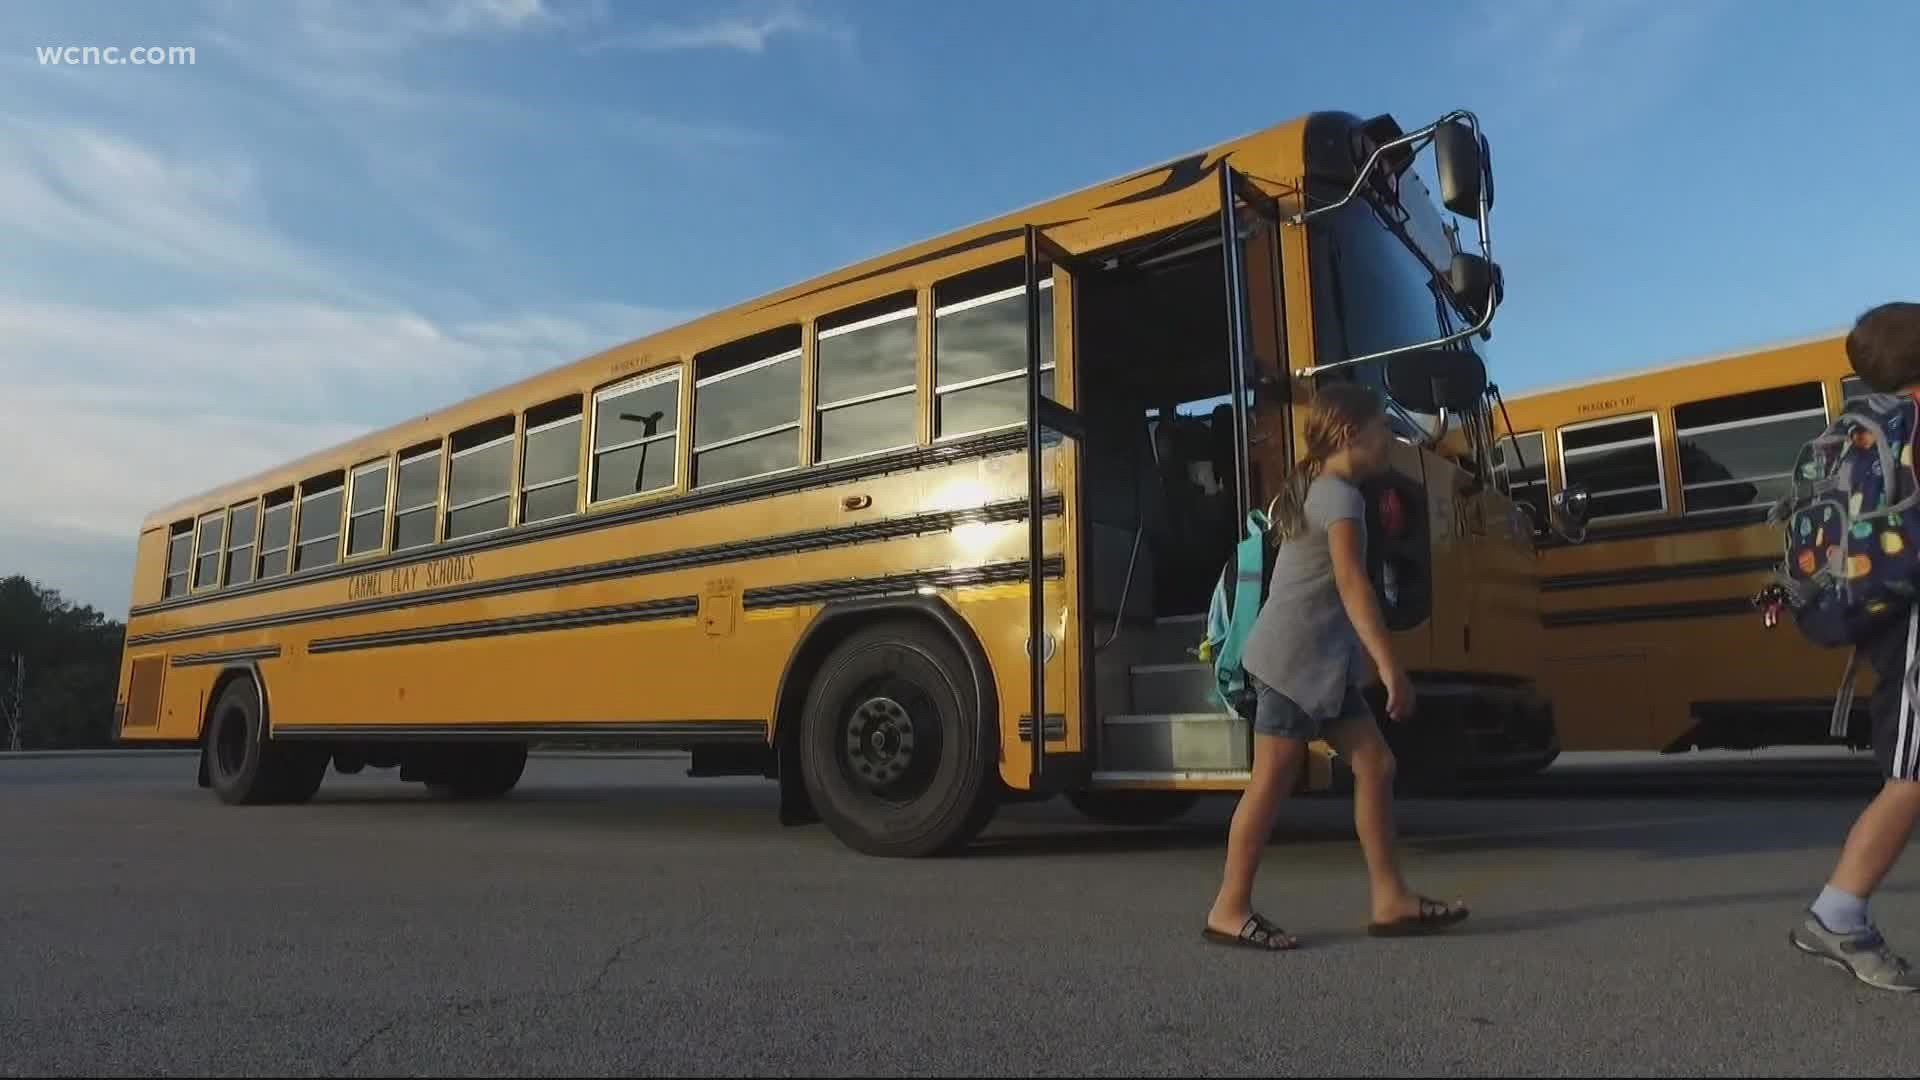 Summer vacation is coming to an end in South Carolina, which means we'll again see school buses on our roads. Follow these rules and we'll keep everyone safe.